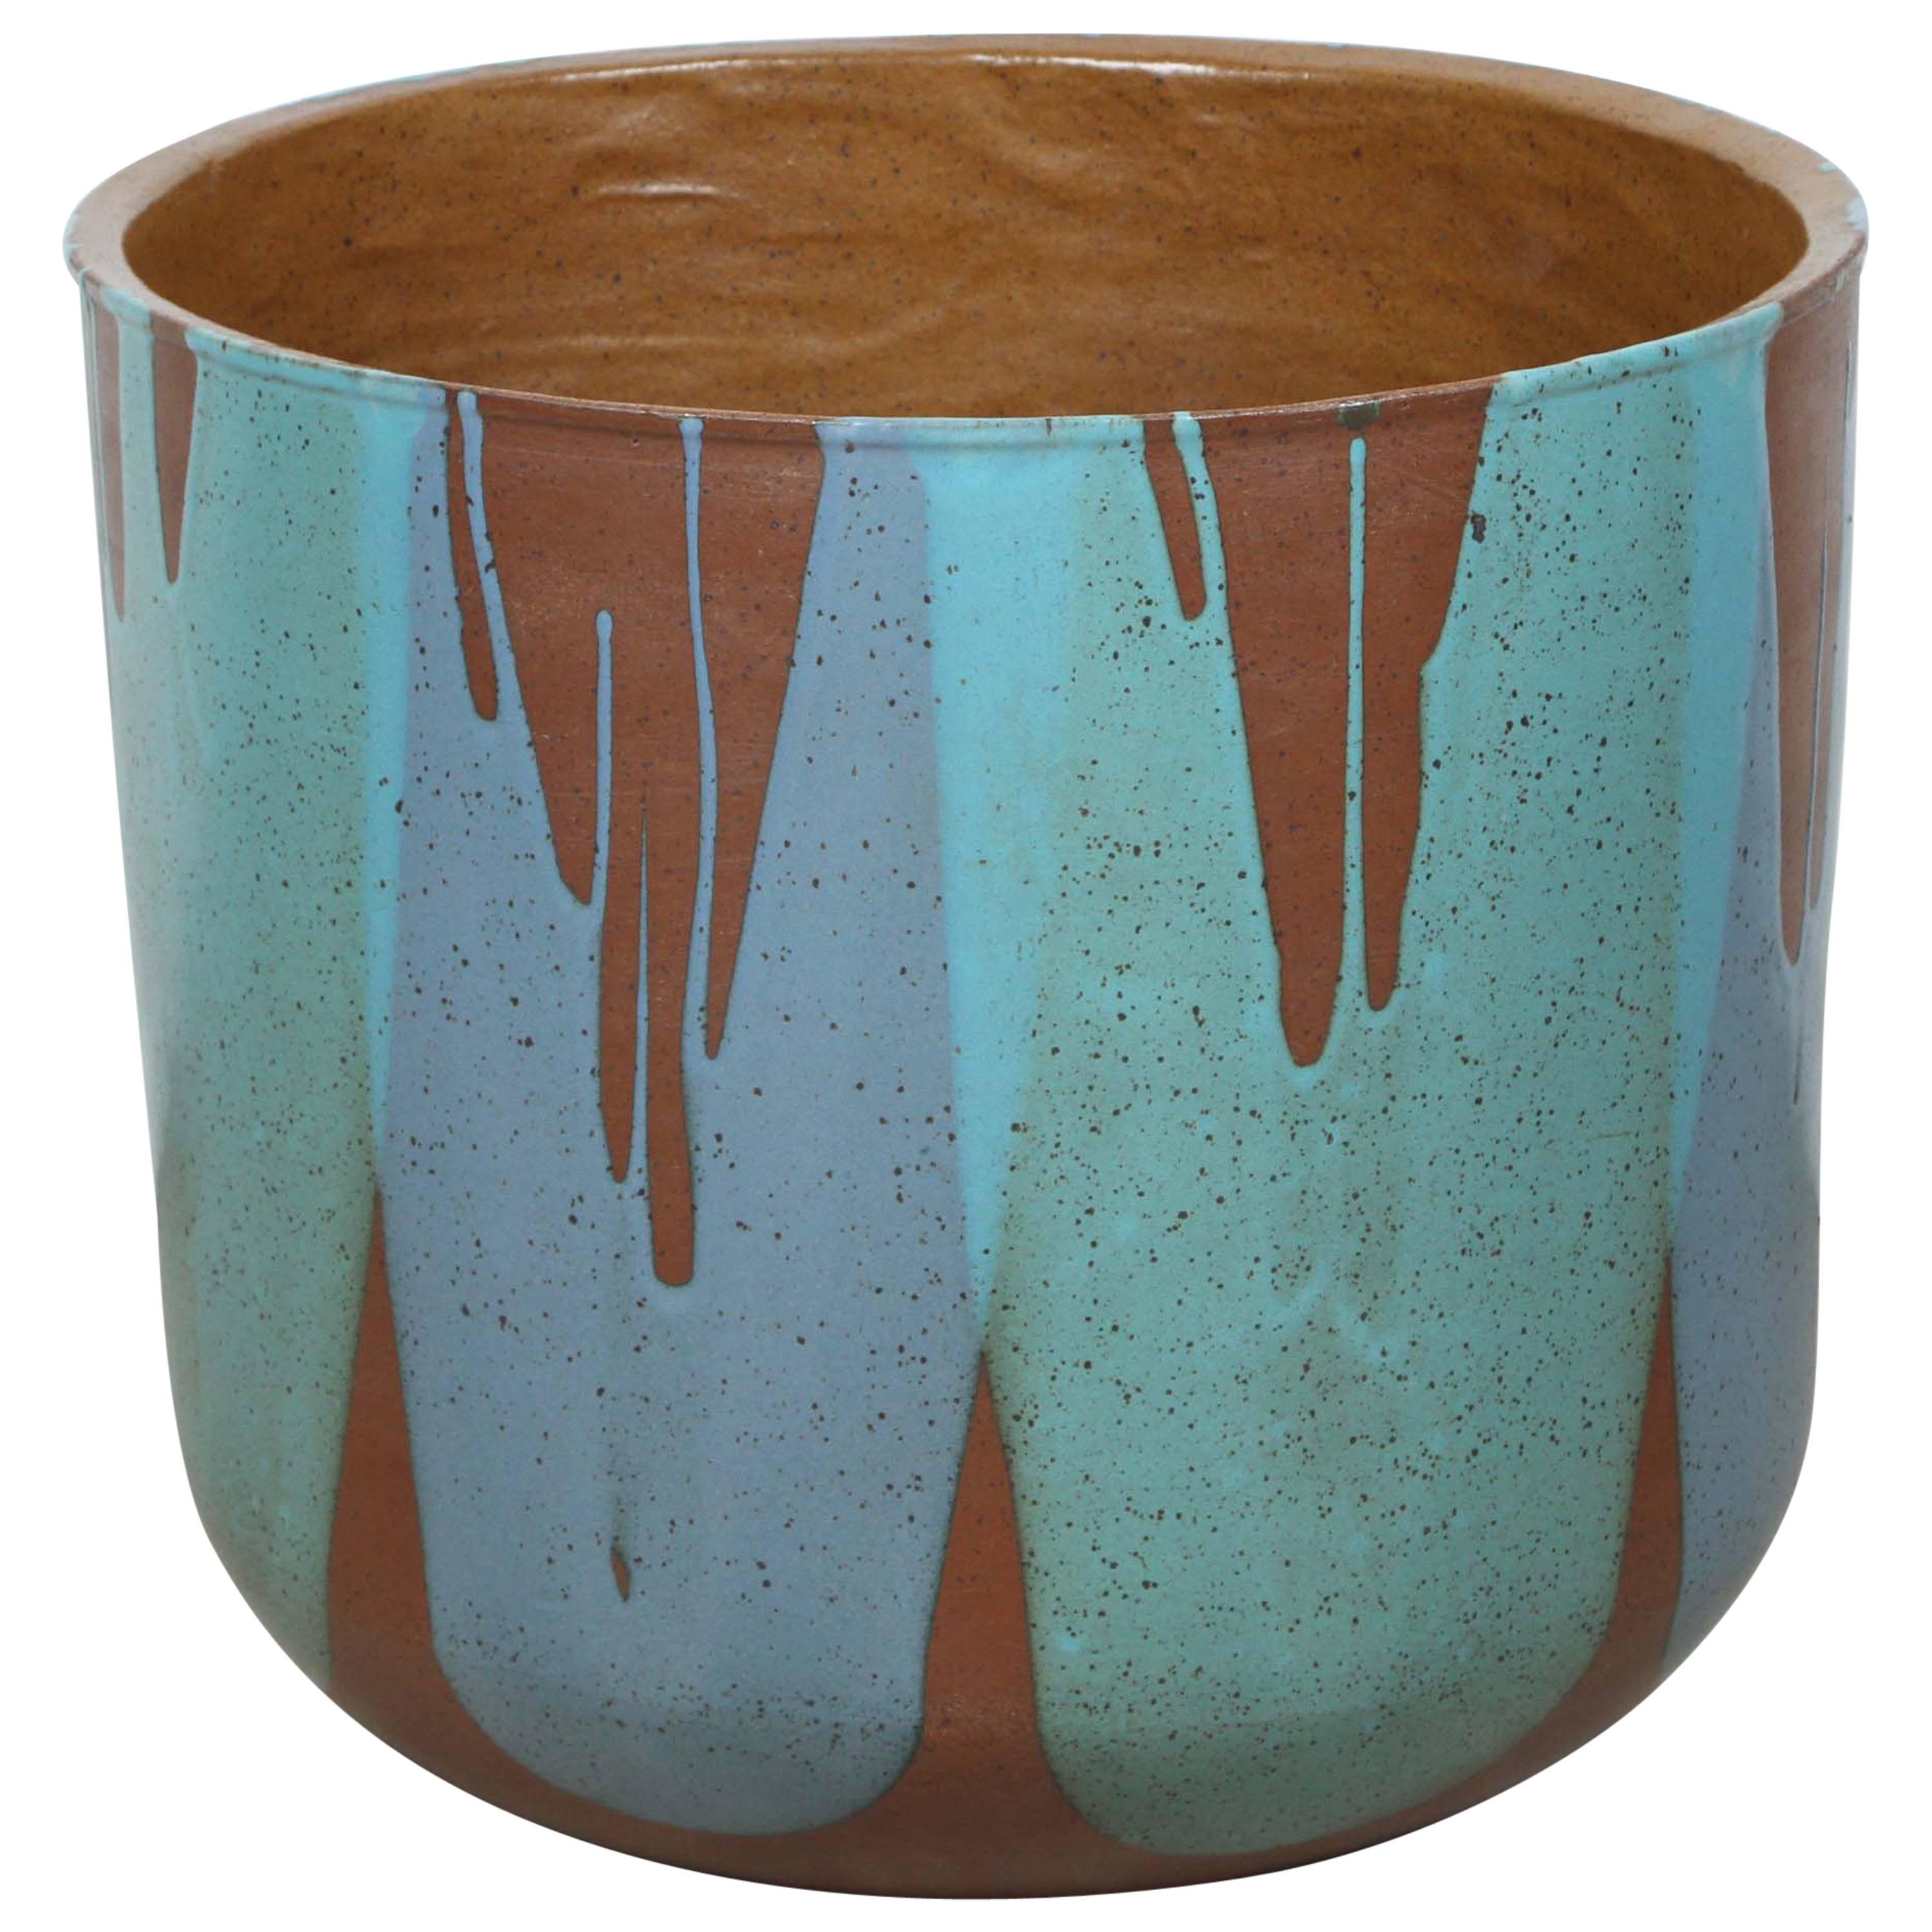 David Cressey for Architectural Pottery Planter For Sale